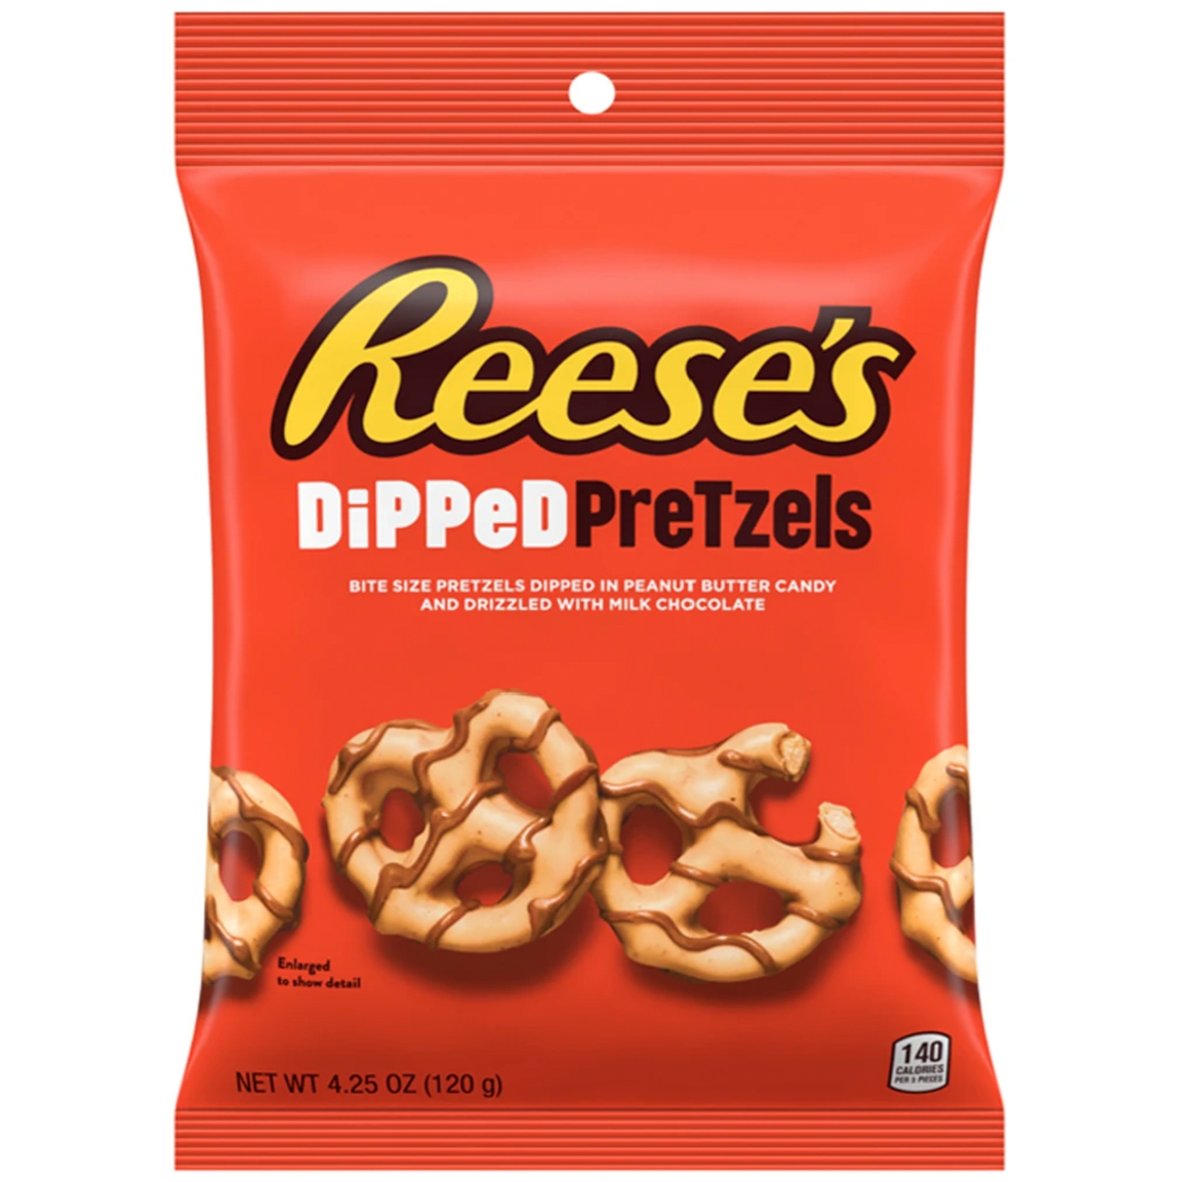 Reese's Peanut Butter Dipped Pretzels 120g (Best Before March 24)